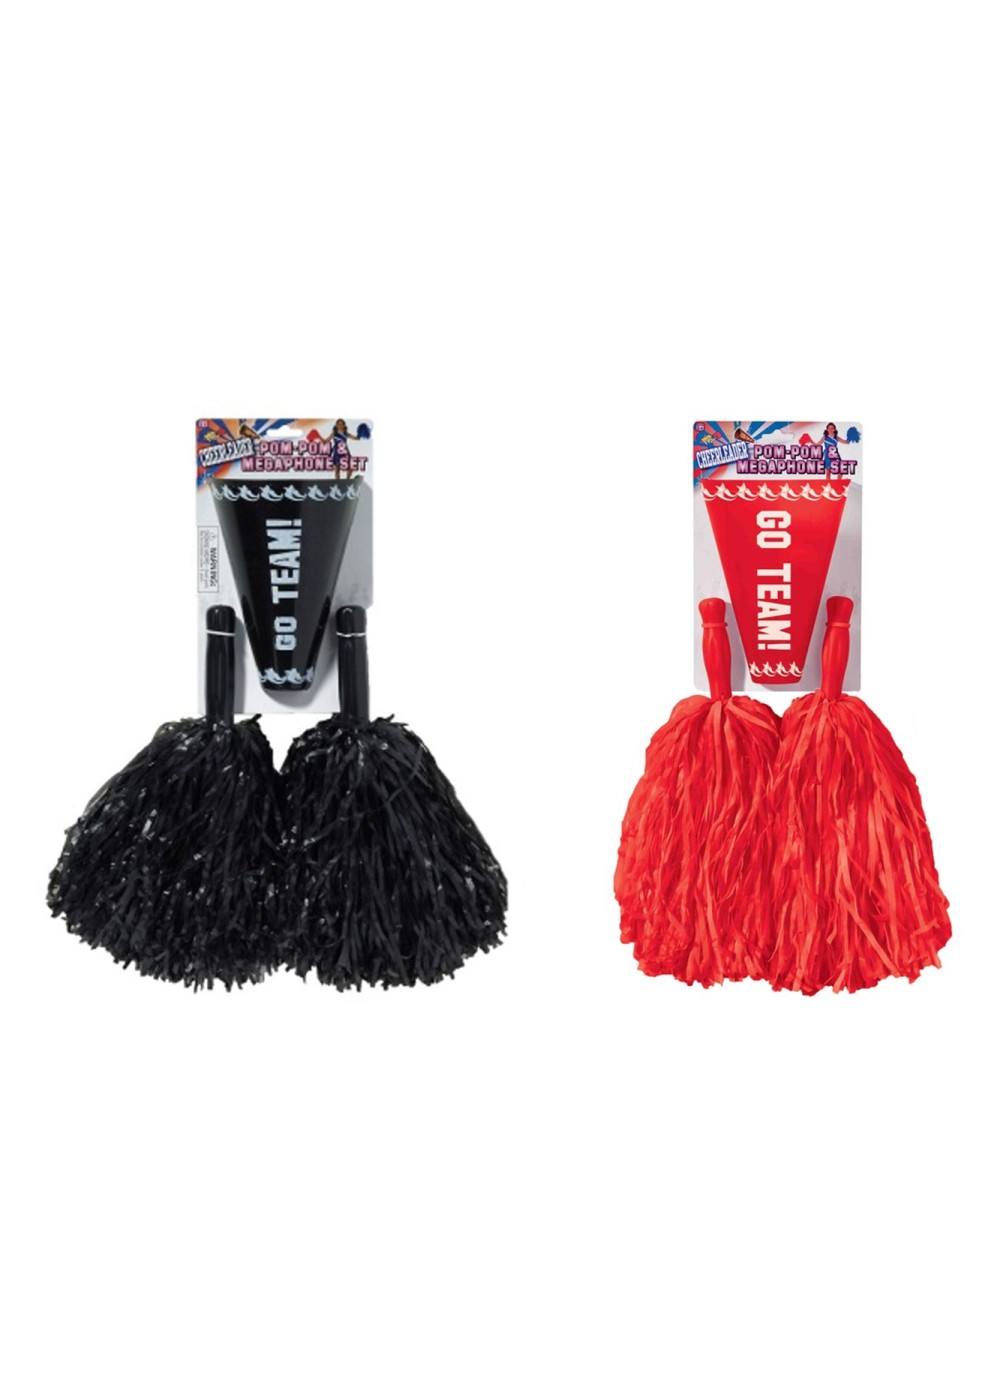 Black And Red Cheerleader Accessory Sets